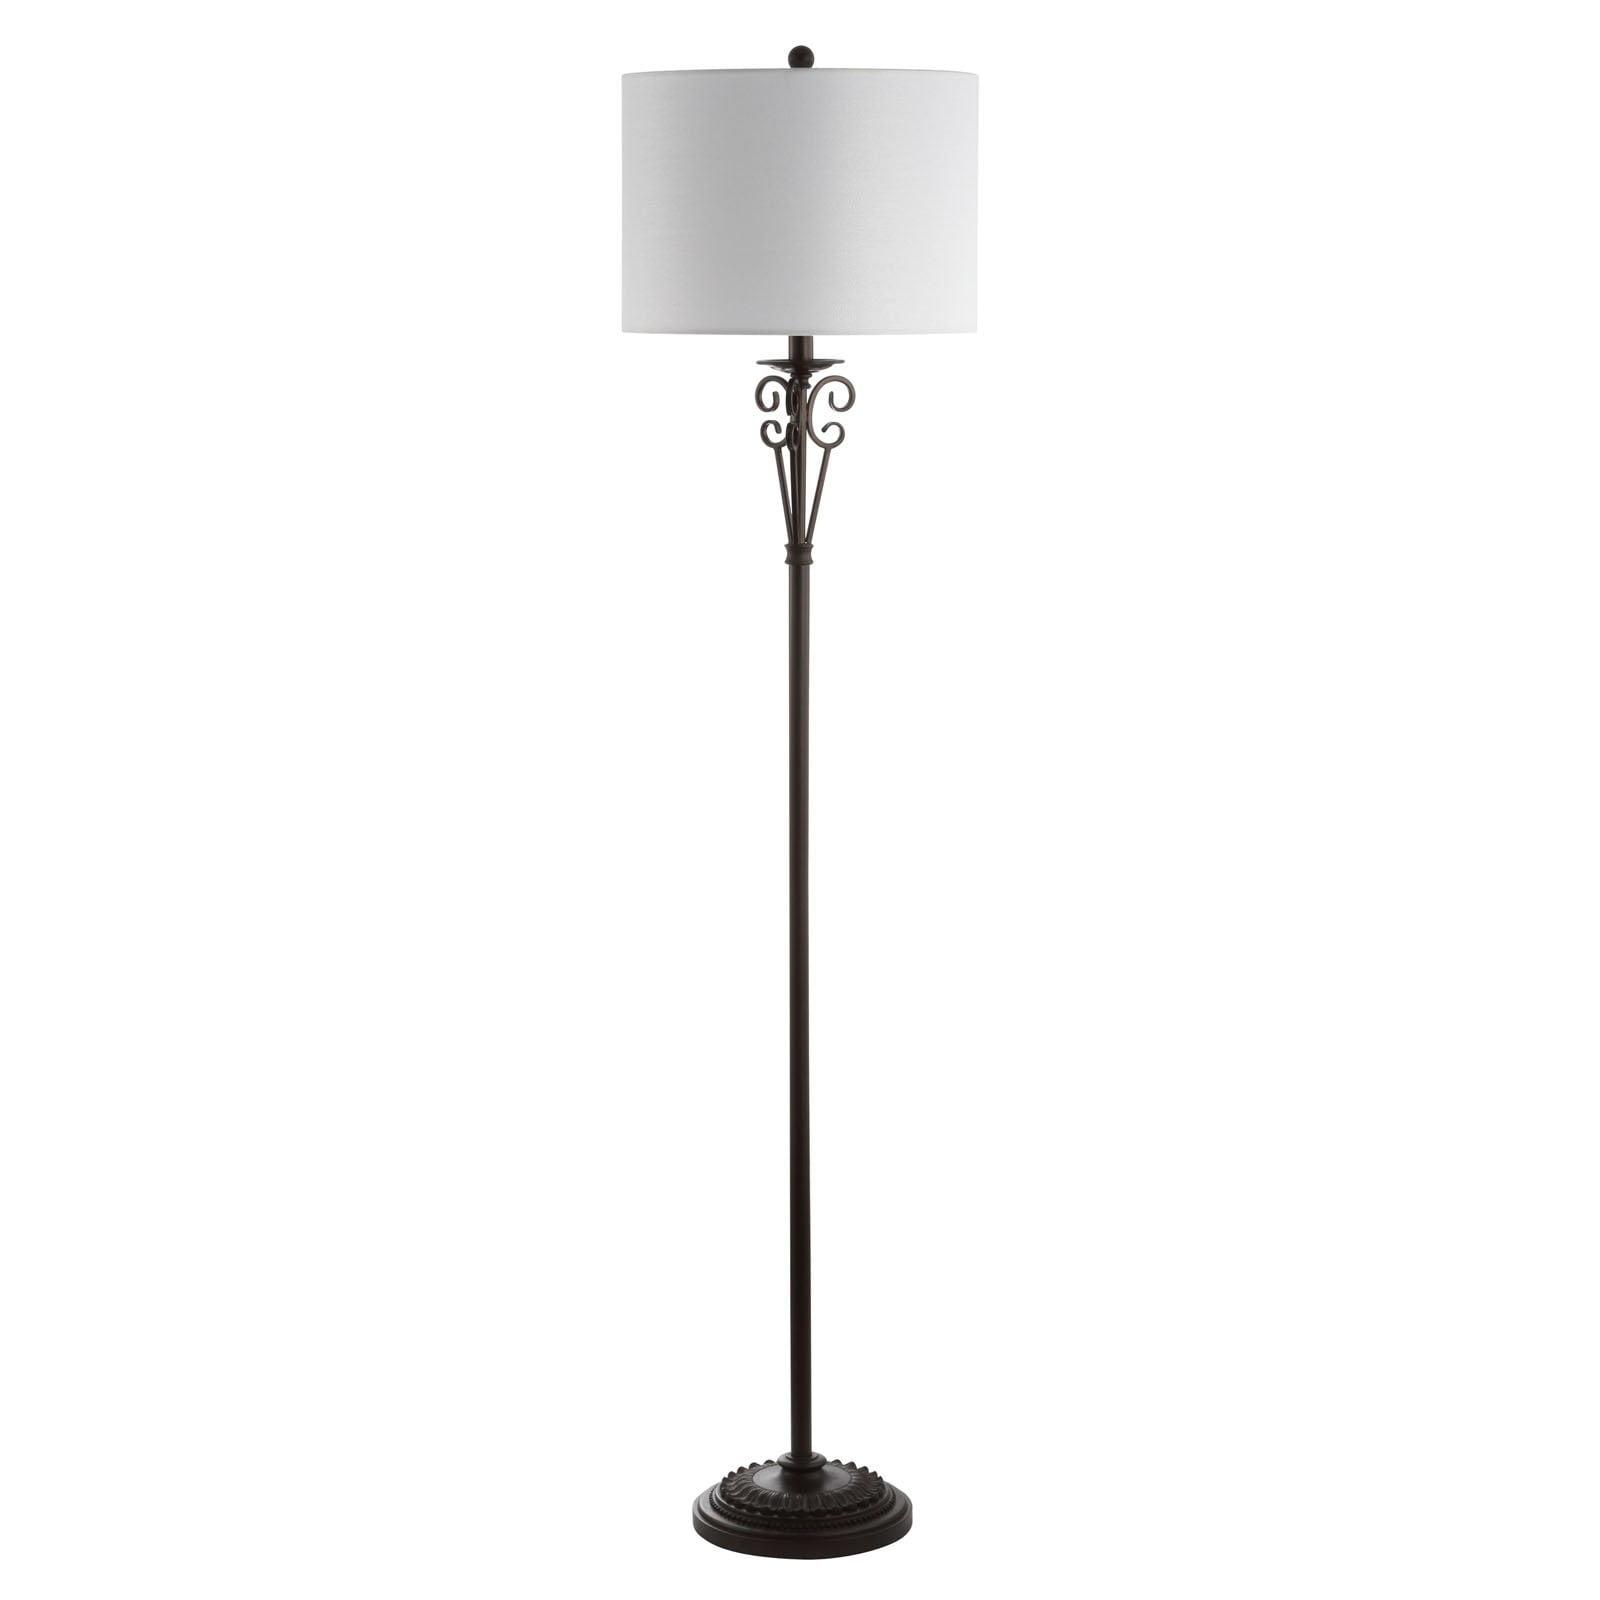 Elegant Antique Brass Floor Lamp with Off-White Shade and 3-Way Switch